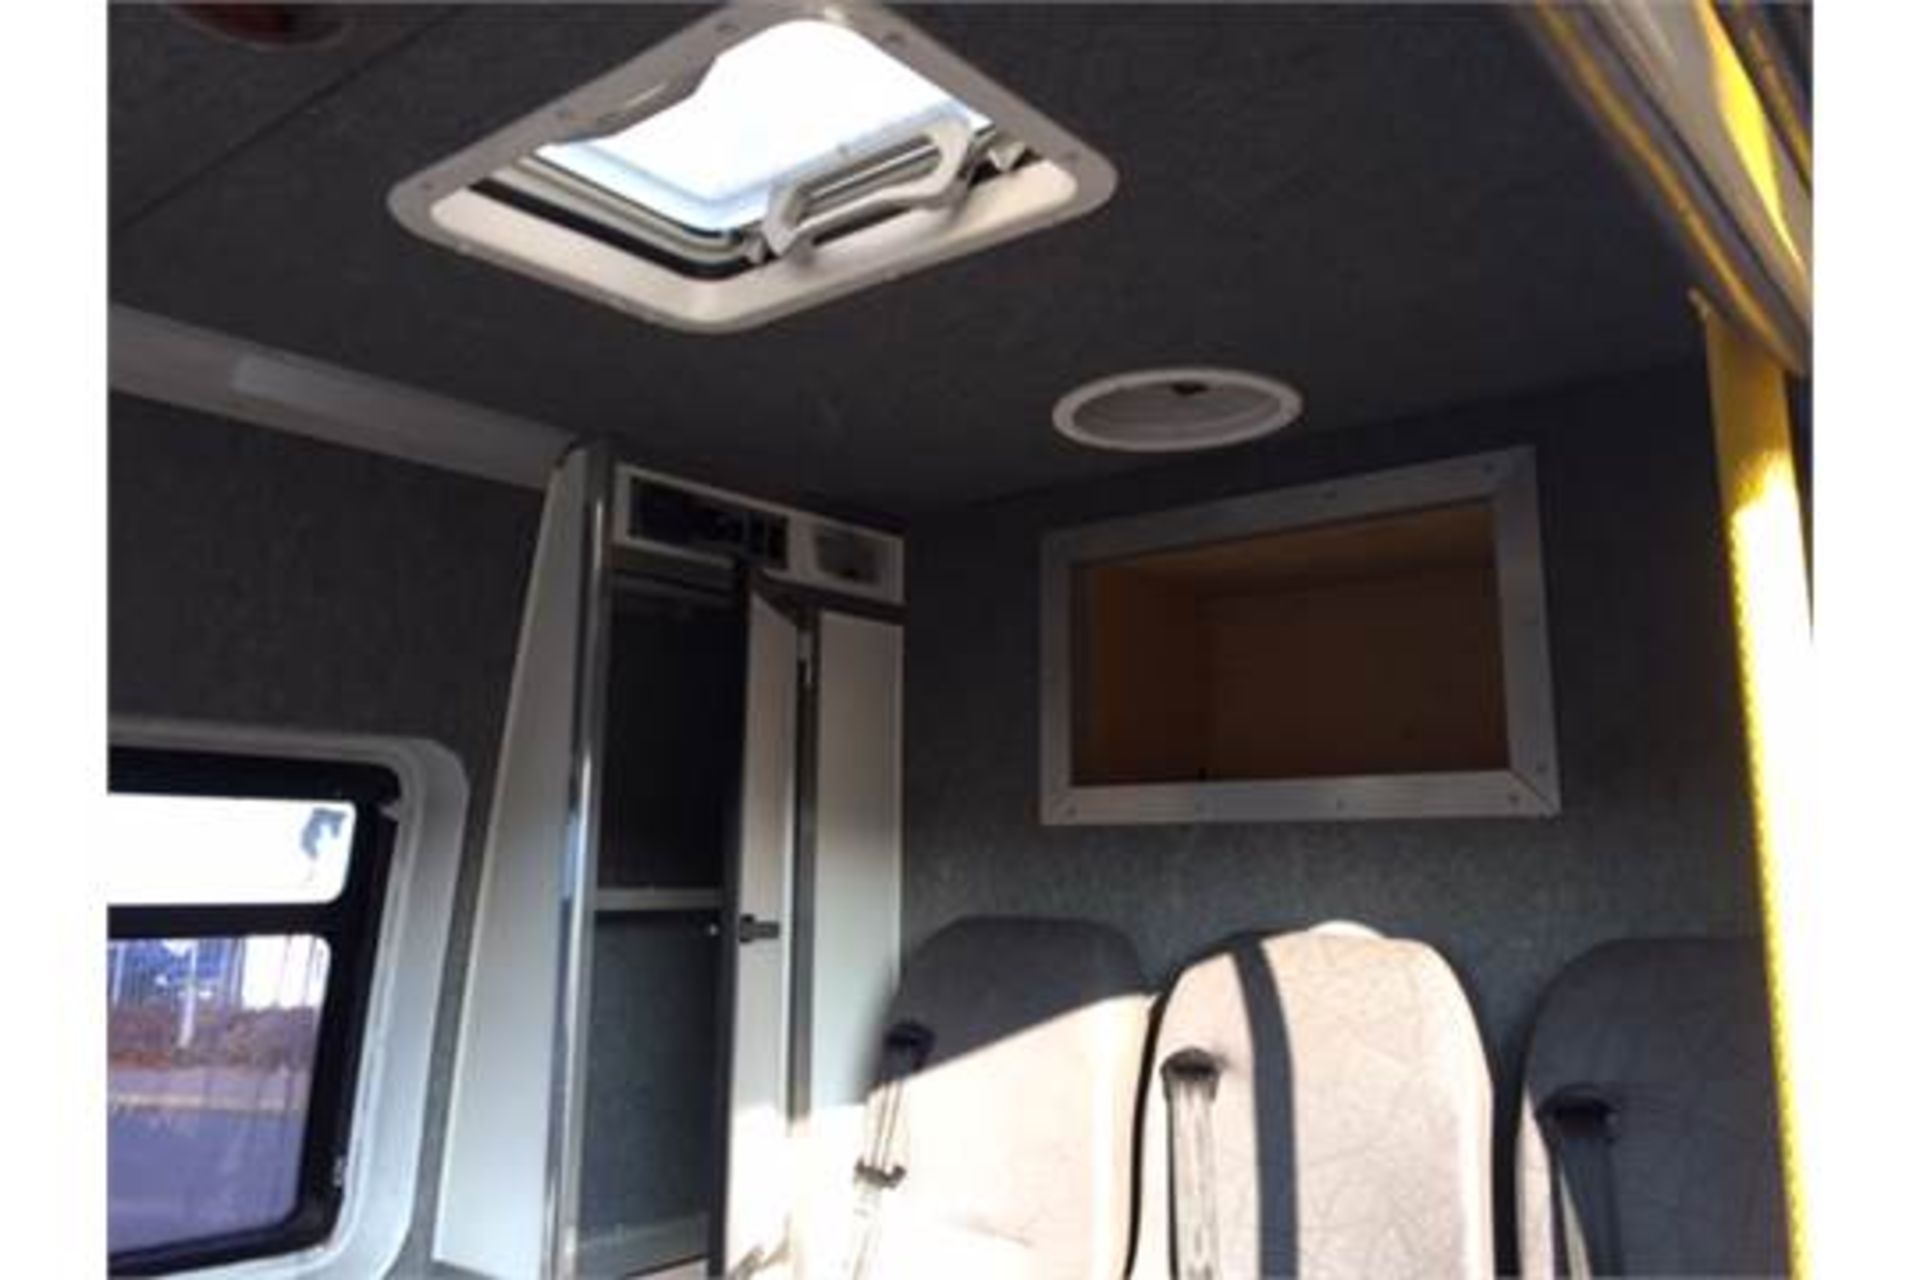 2005 Mercedes Sprinter 311 cdi 2148cc Diesel Van with side windows Owned and used by the police from - Image 12 of 23